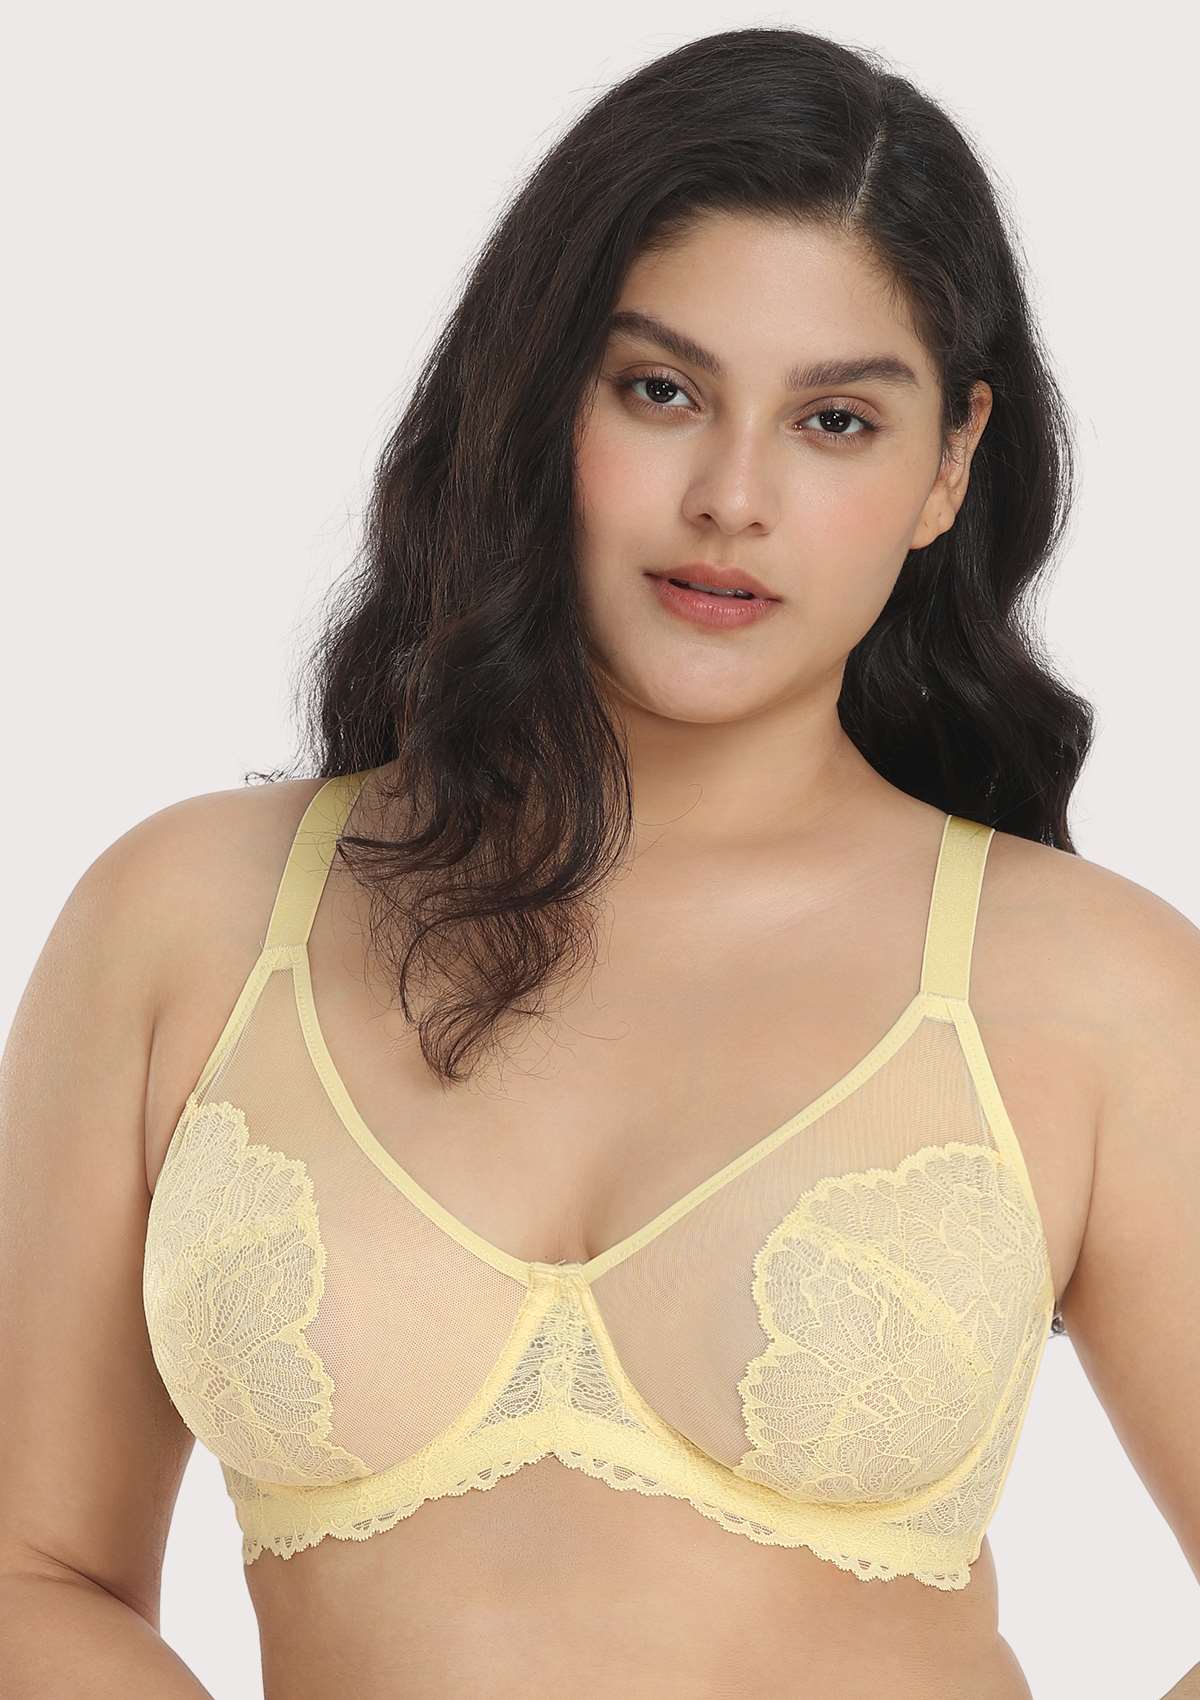 HSIA Blossom Full Coverage Side Support Bra: Designed For Heavy Busts - Light Yellow / 34 / H